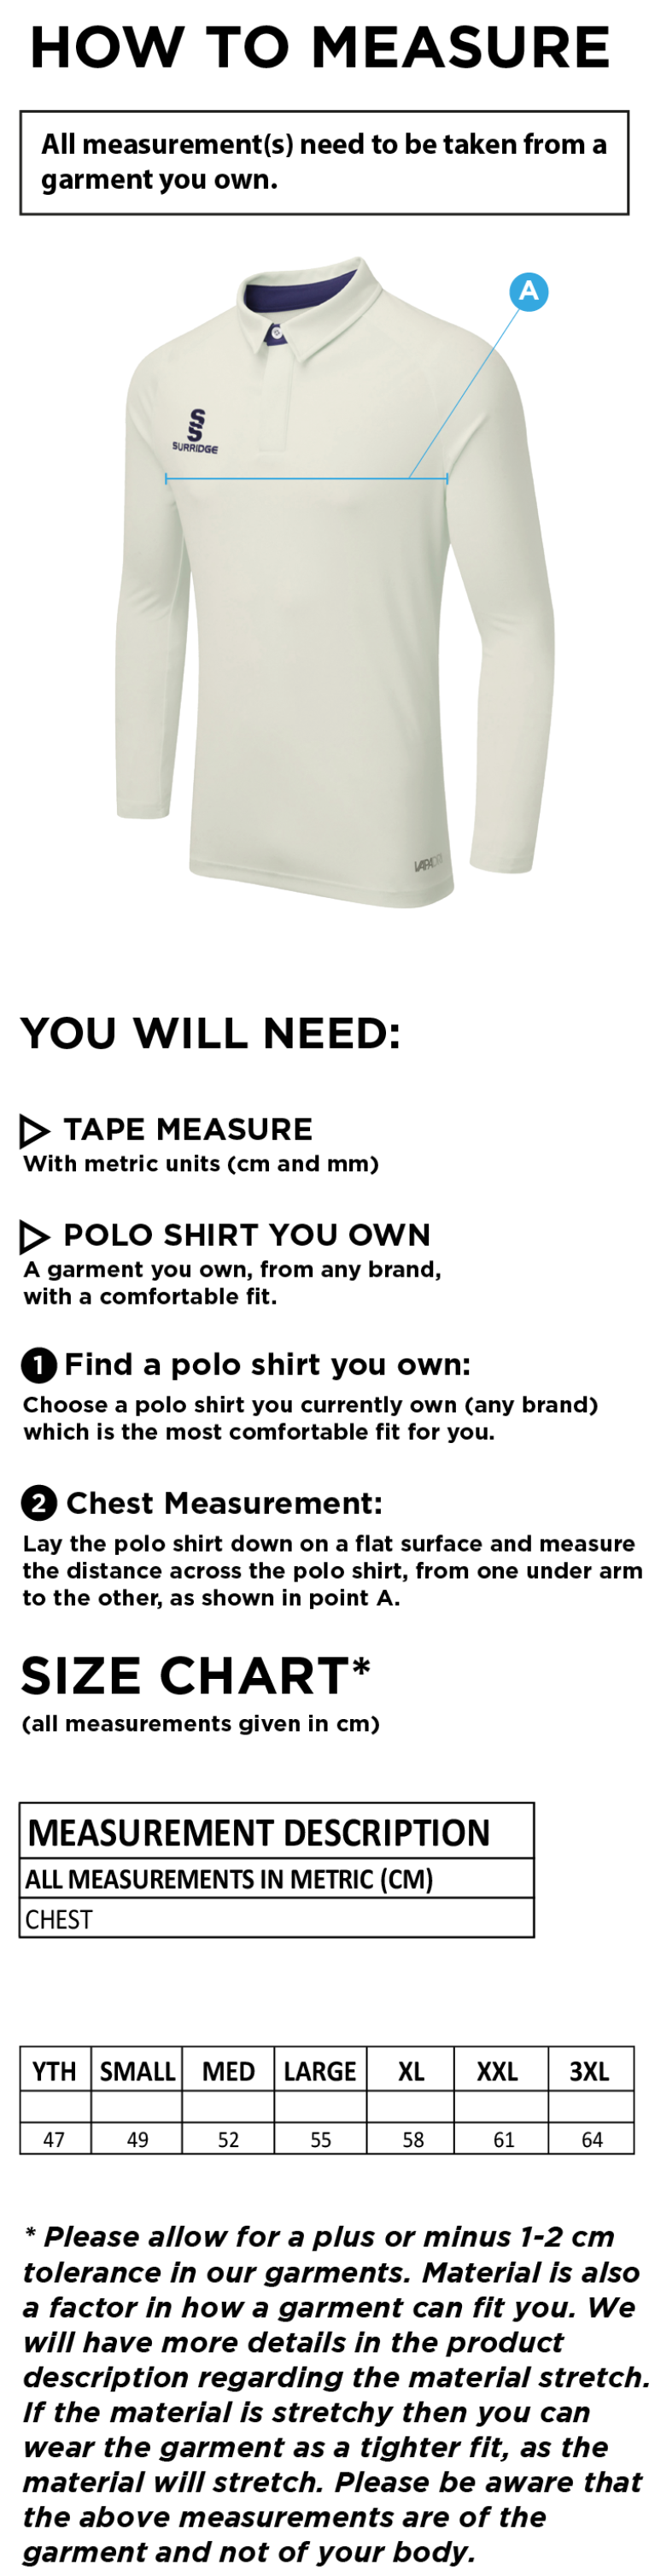 Waltham St Lawrence CC  -Ergo L/S Shirt - Size Guide